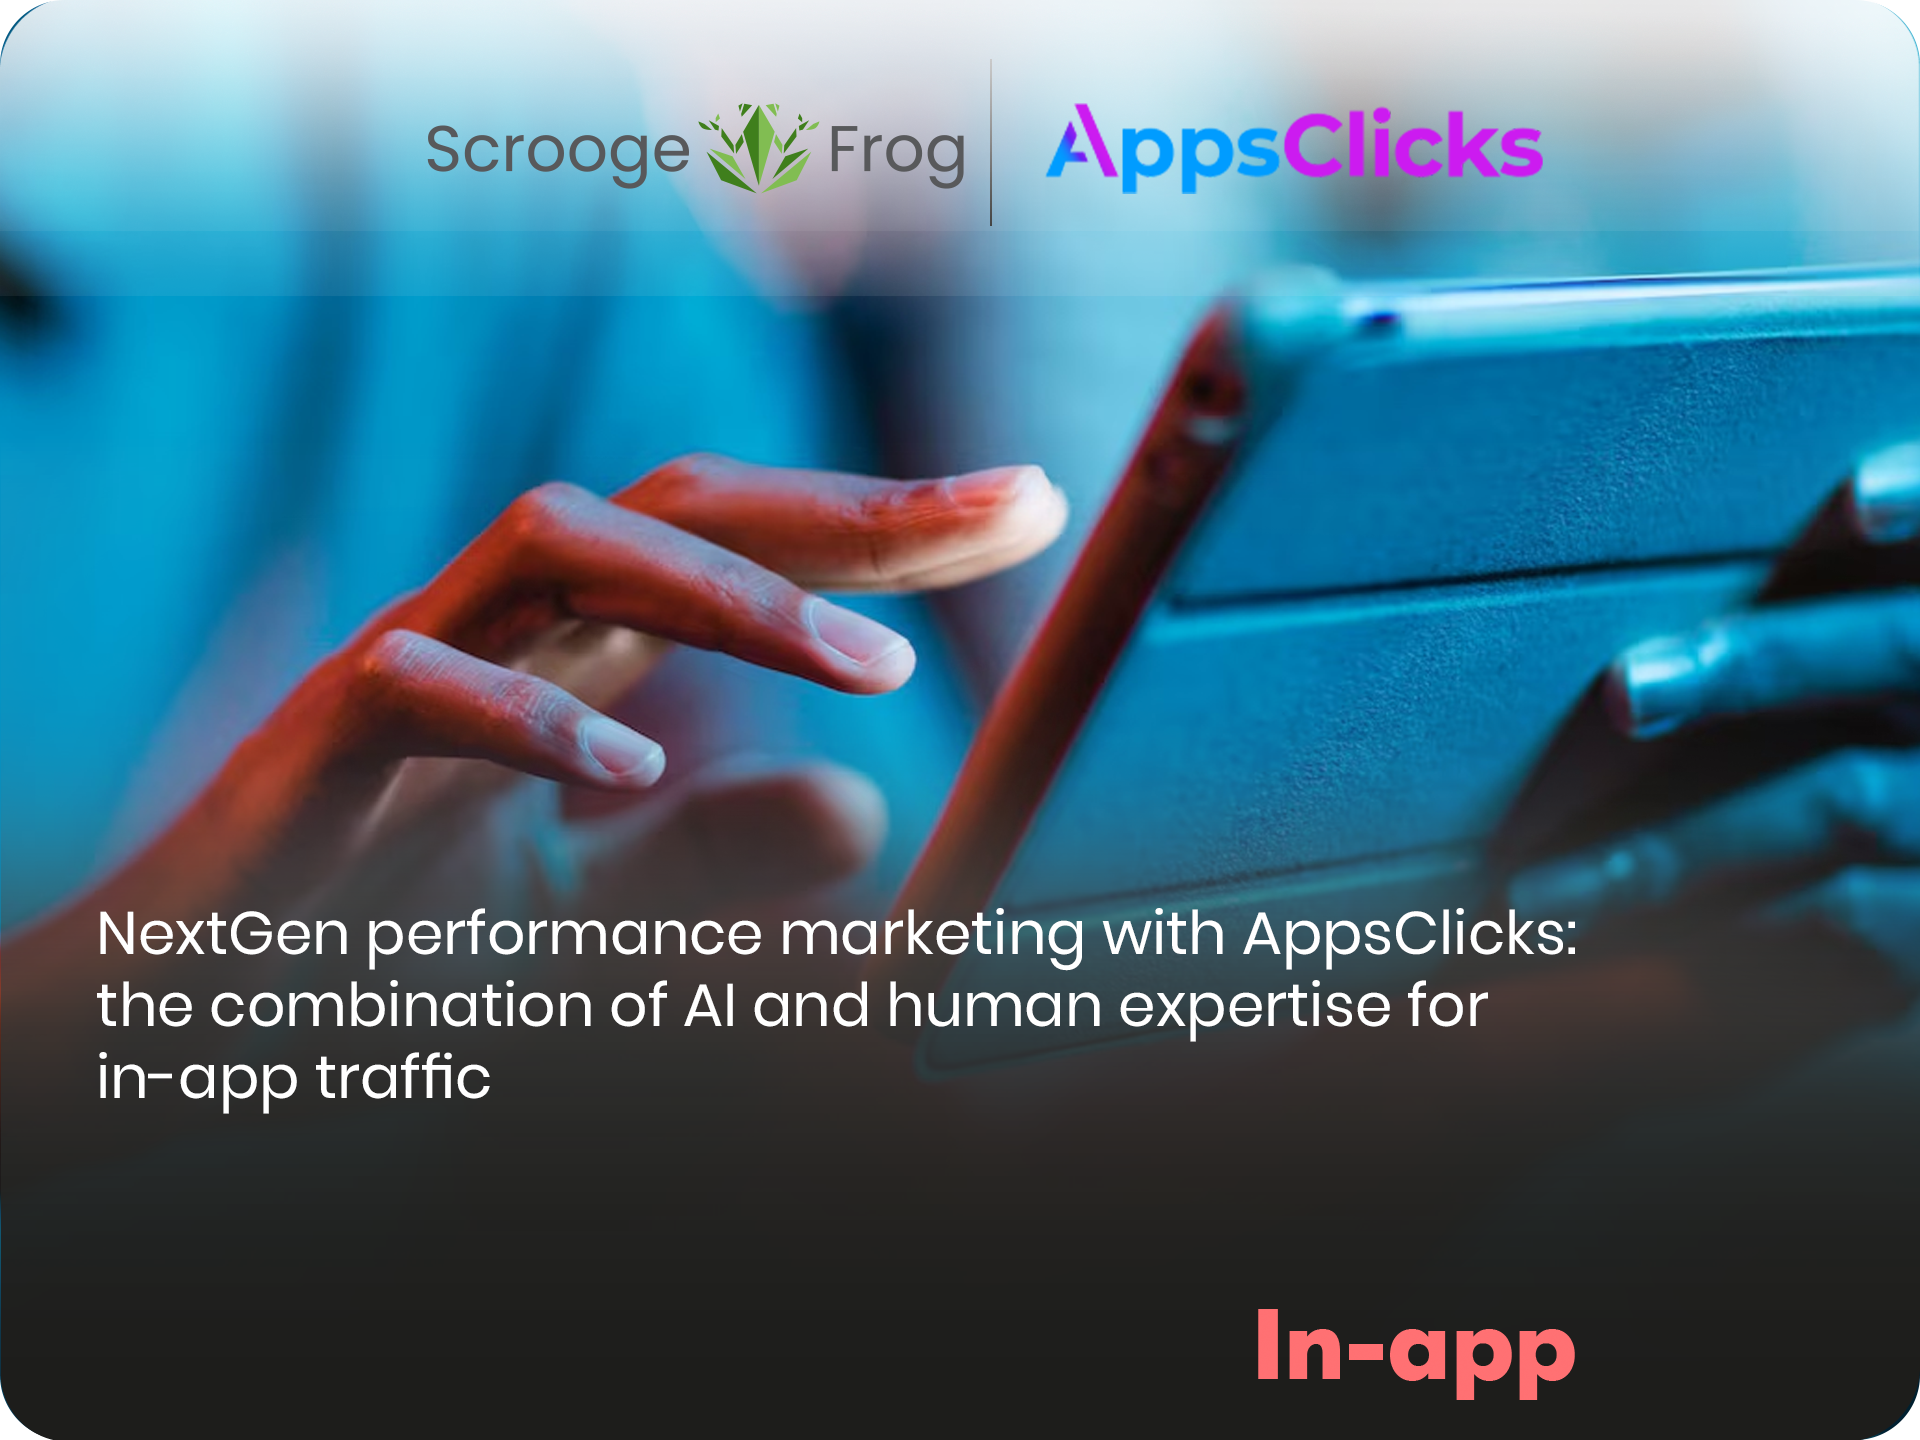 NextGen performance marketing with AppsClicks: the combination of AI and human expertise for in-app traffic